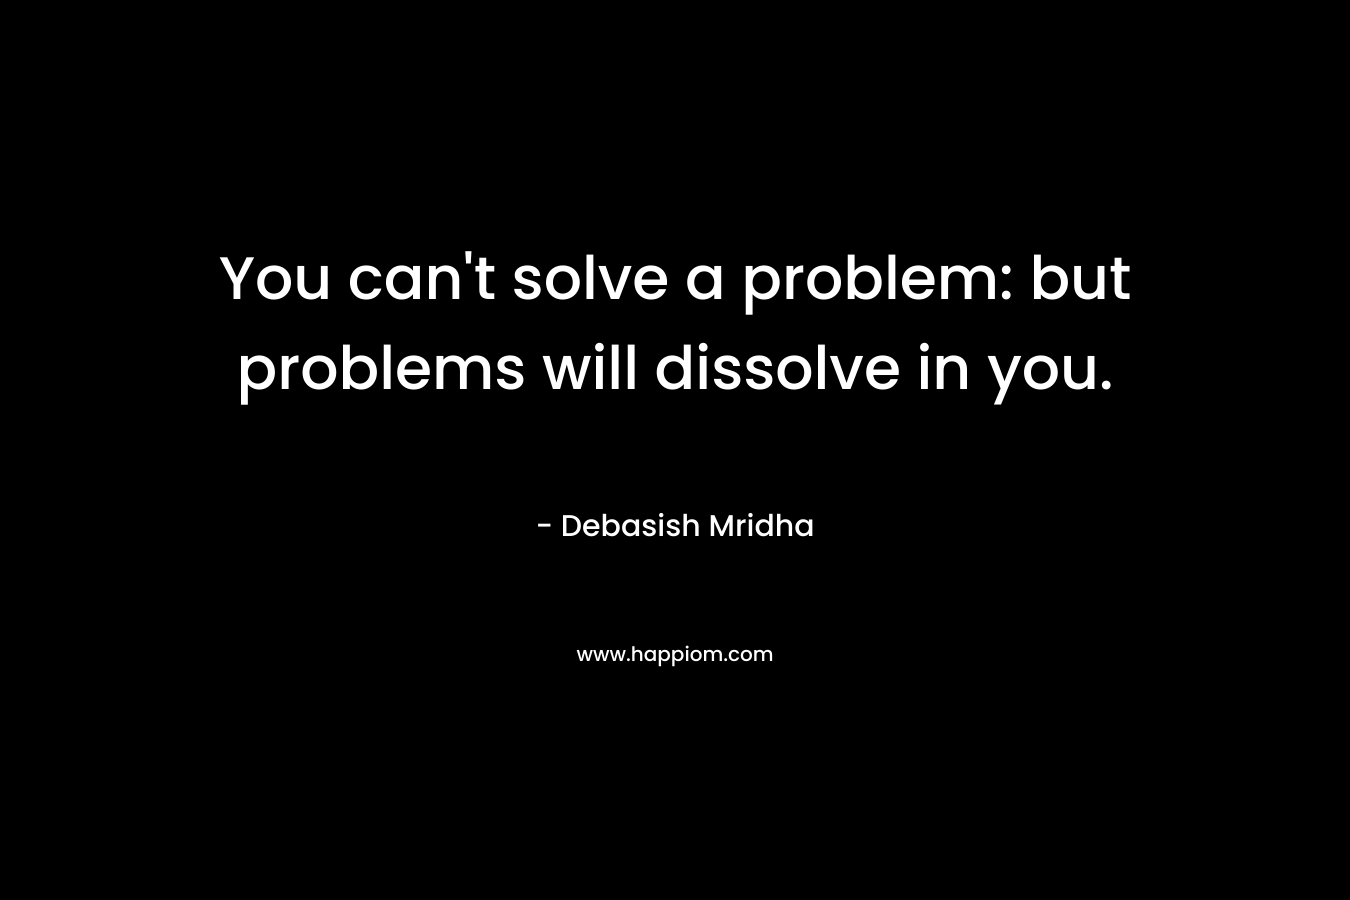 You can't solve a problem: but problems will dissolve in you.